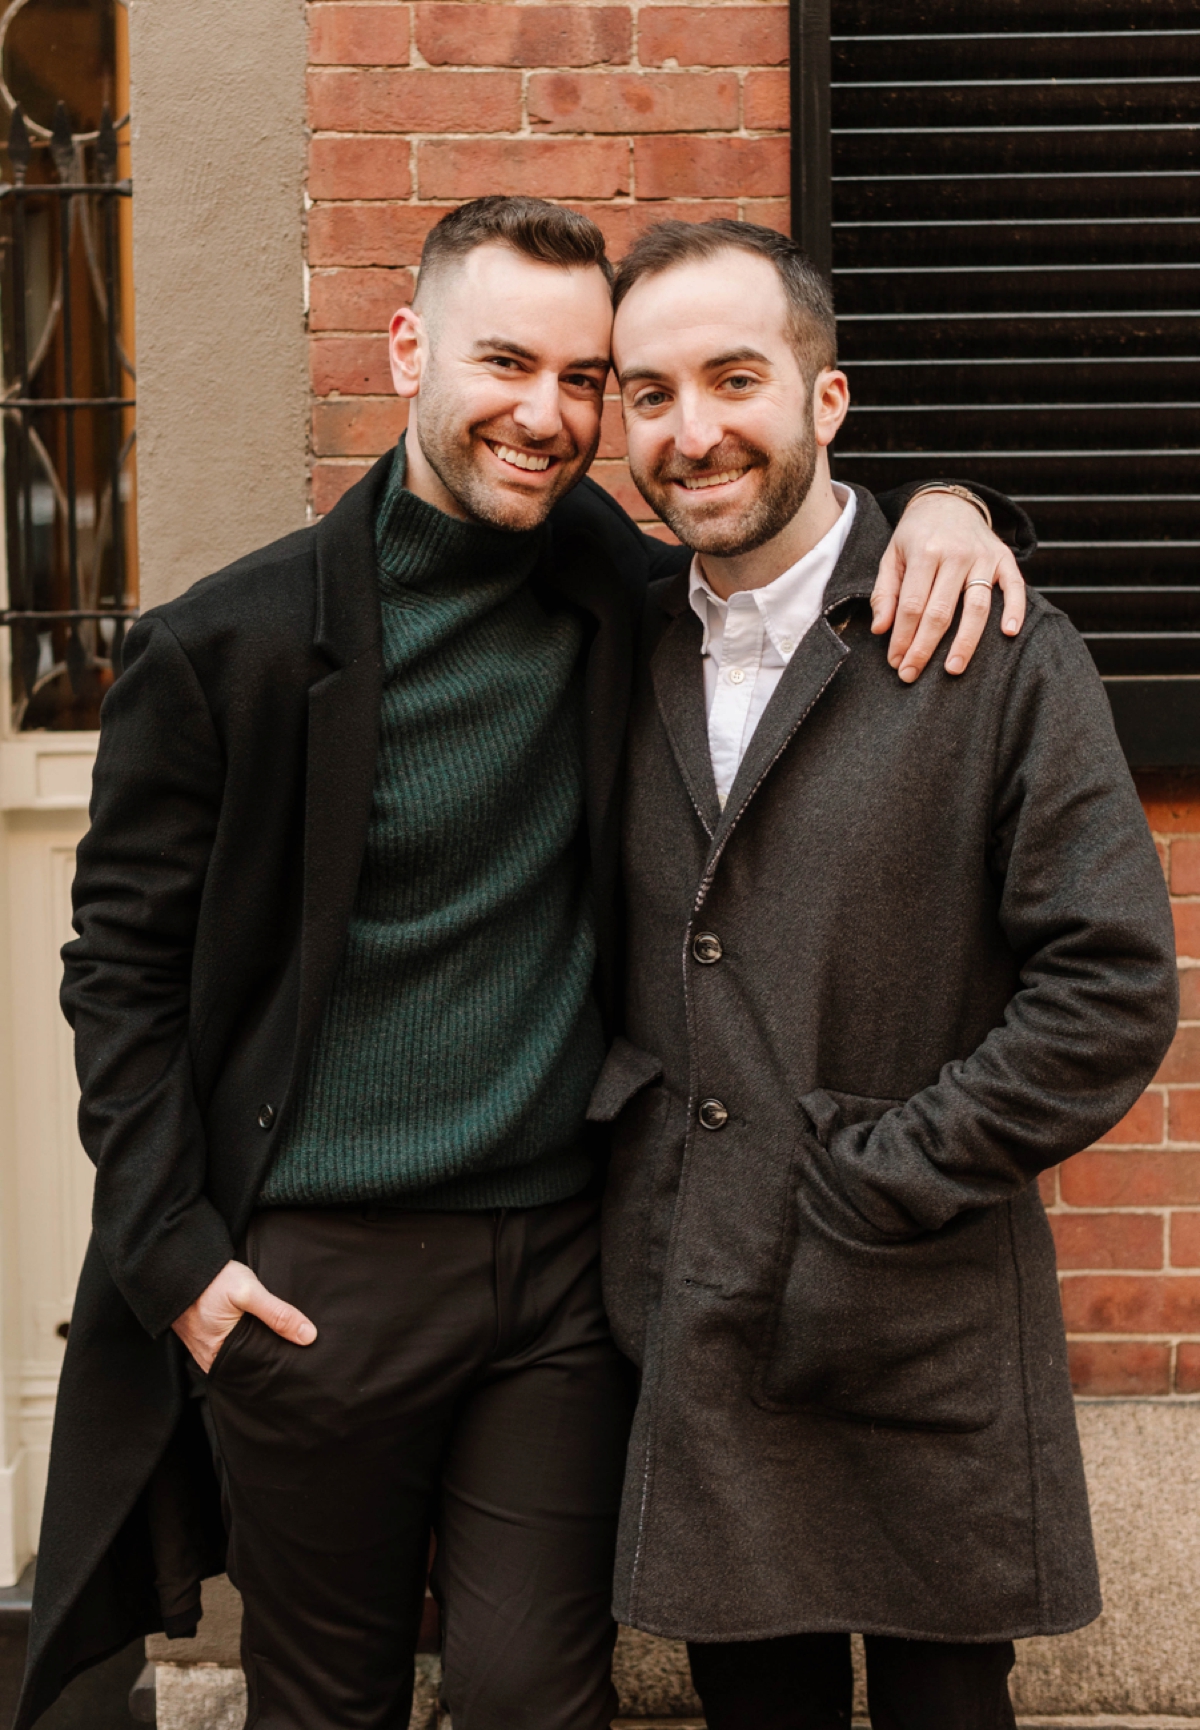 Same Sex Boston Engagement Session at Beacon Hill & the Boston Public Library shot by Boston Wedding Photographer Annmarie Swift